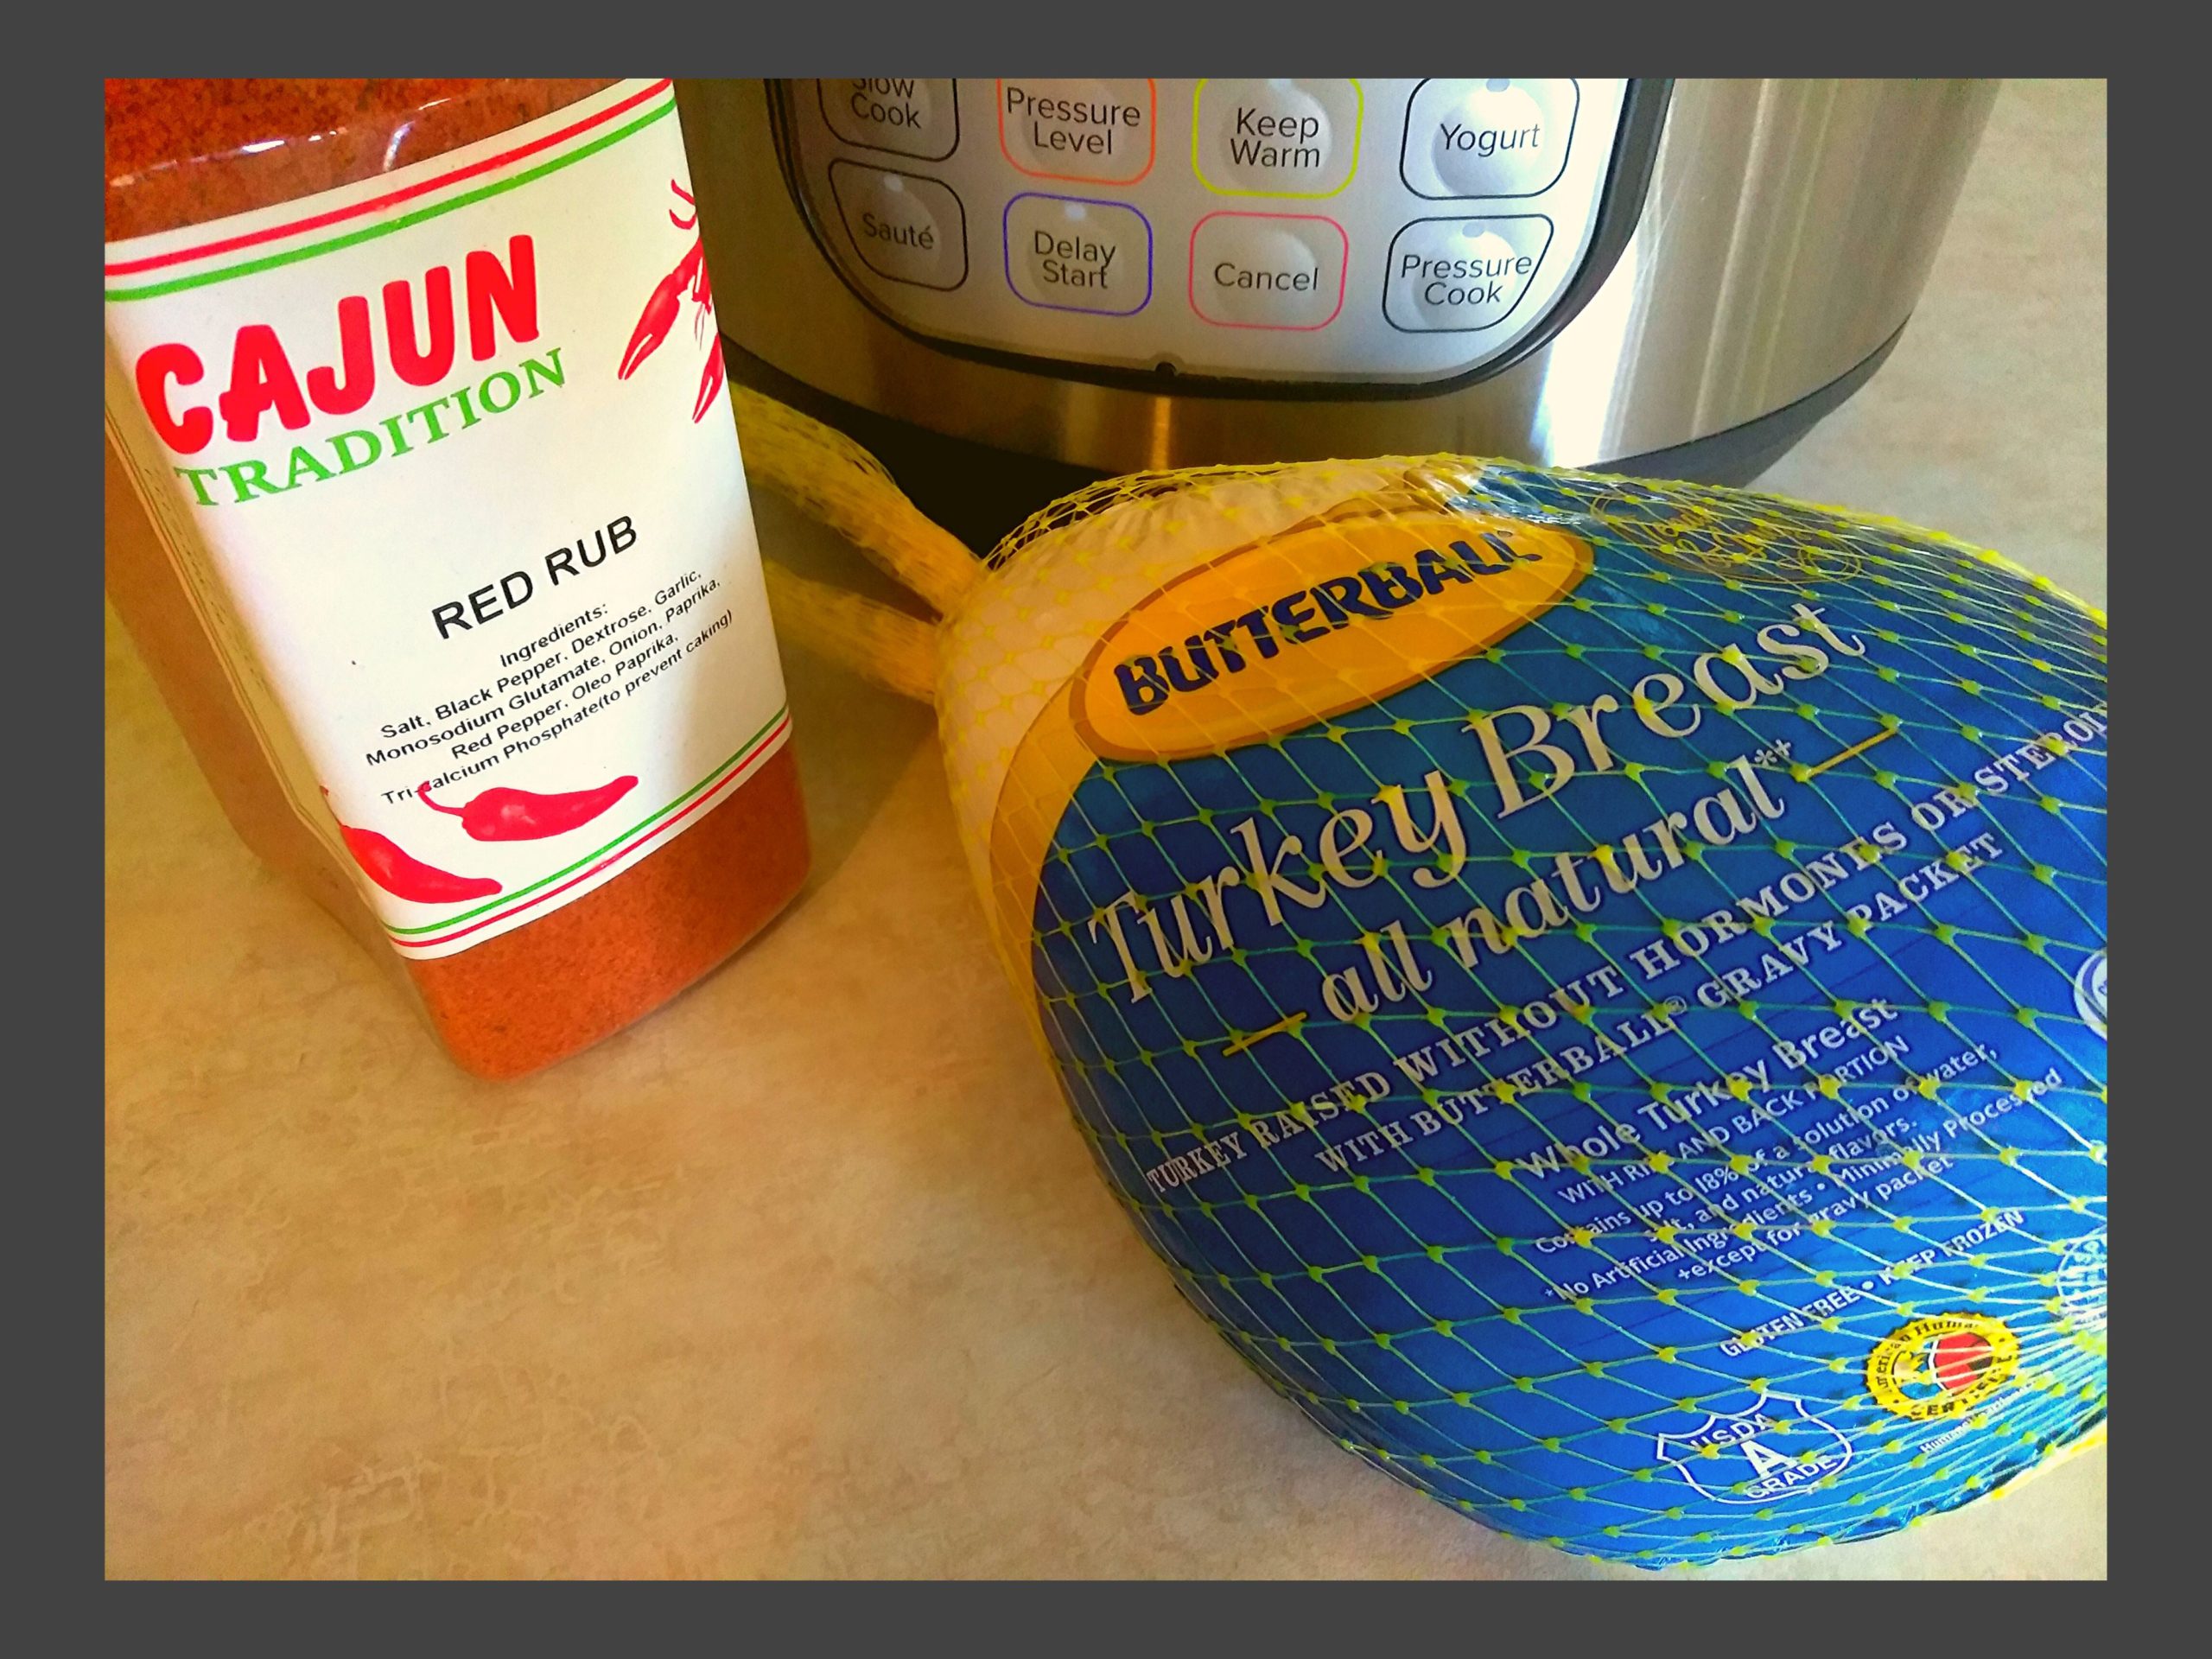 A container of red rub seasoning, a frozen butterball turkey breast in the wrapper, sitting in front of an Instant Pot.